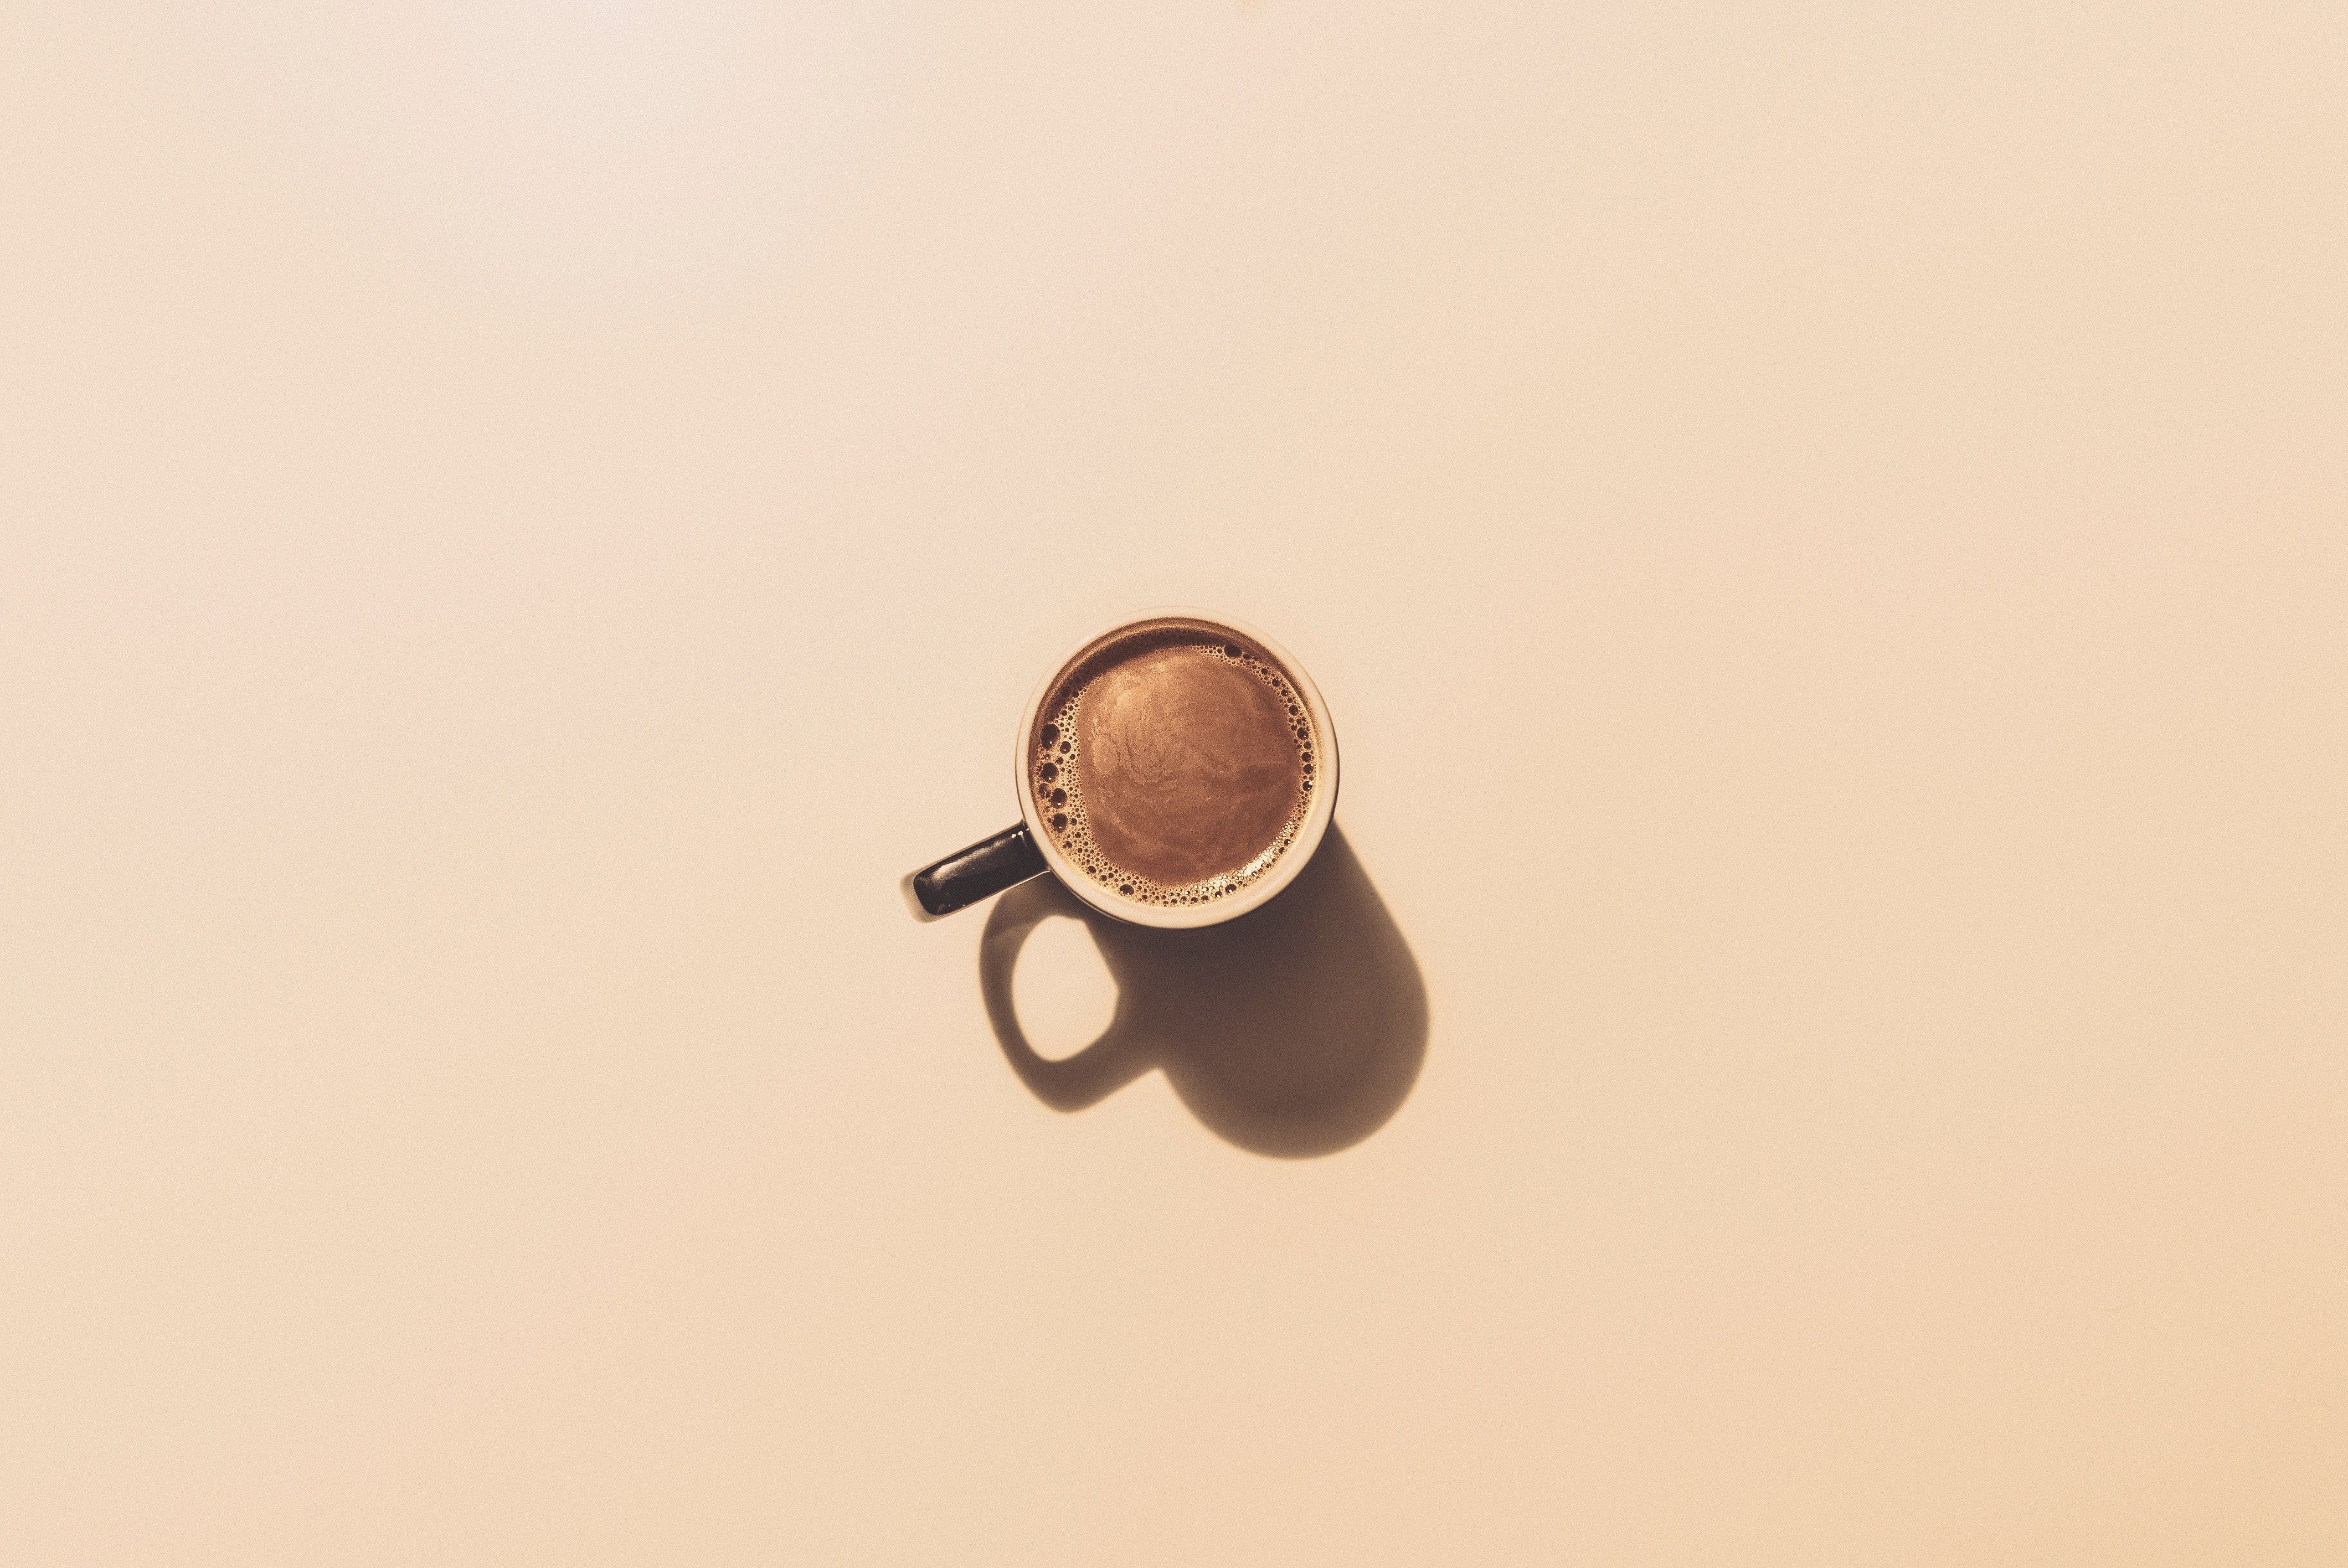 A cup of coffee on a white background - Coffee